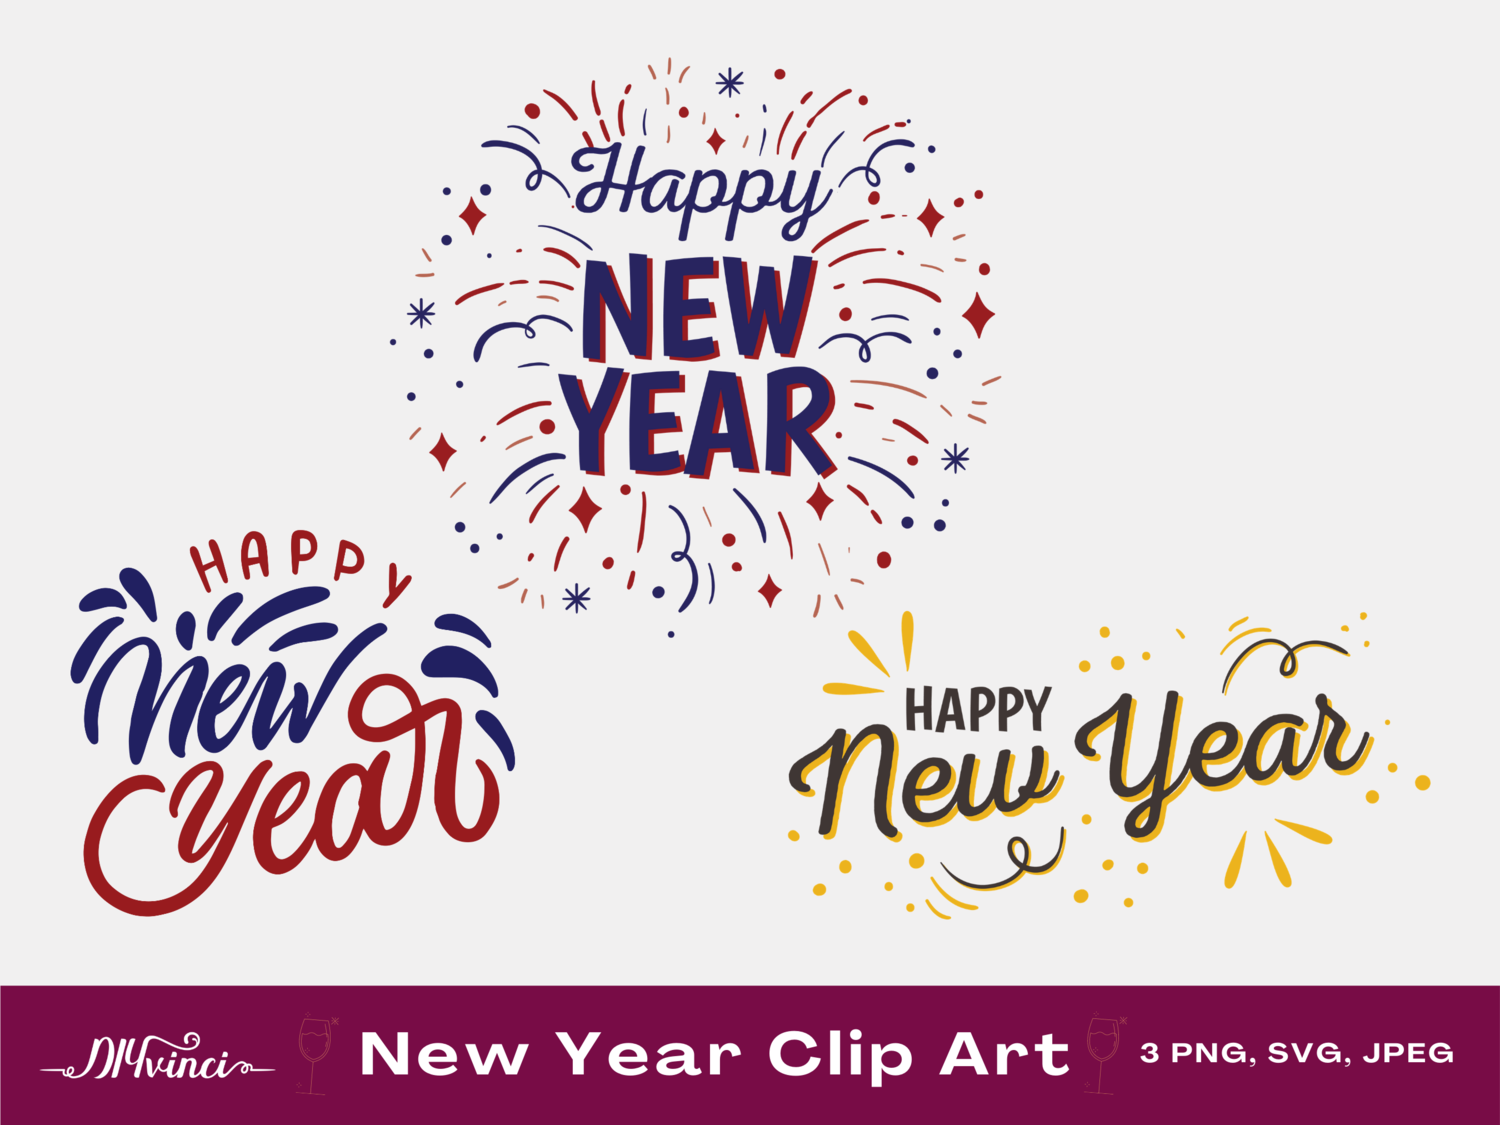 3 Happy New Year Graphics - SVG, PNG, JPEG - Personal & Commercial Use